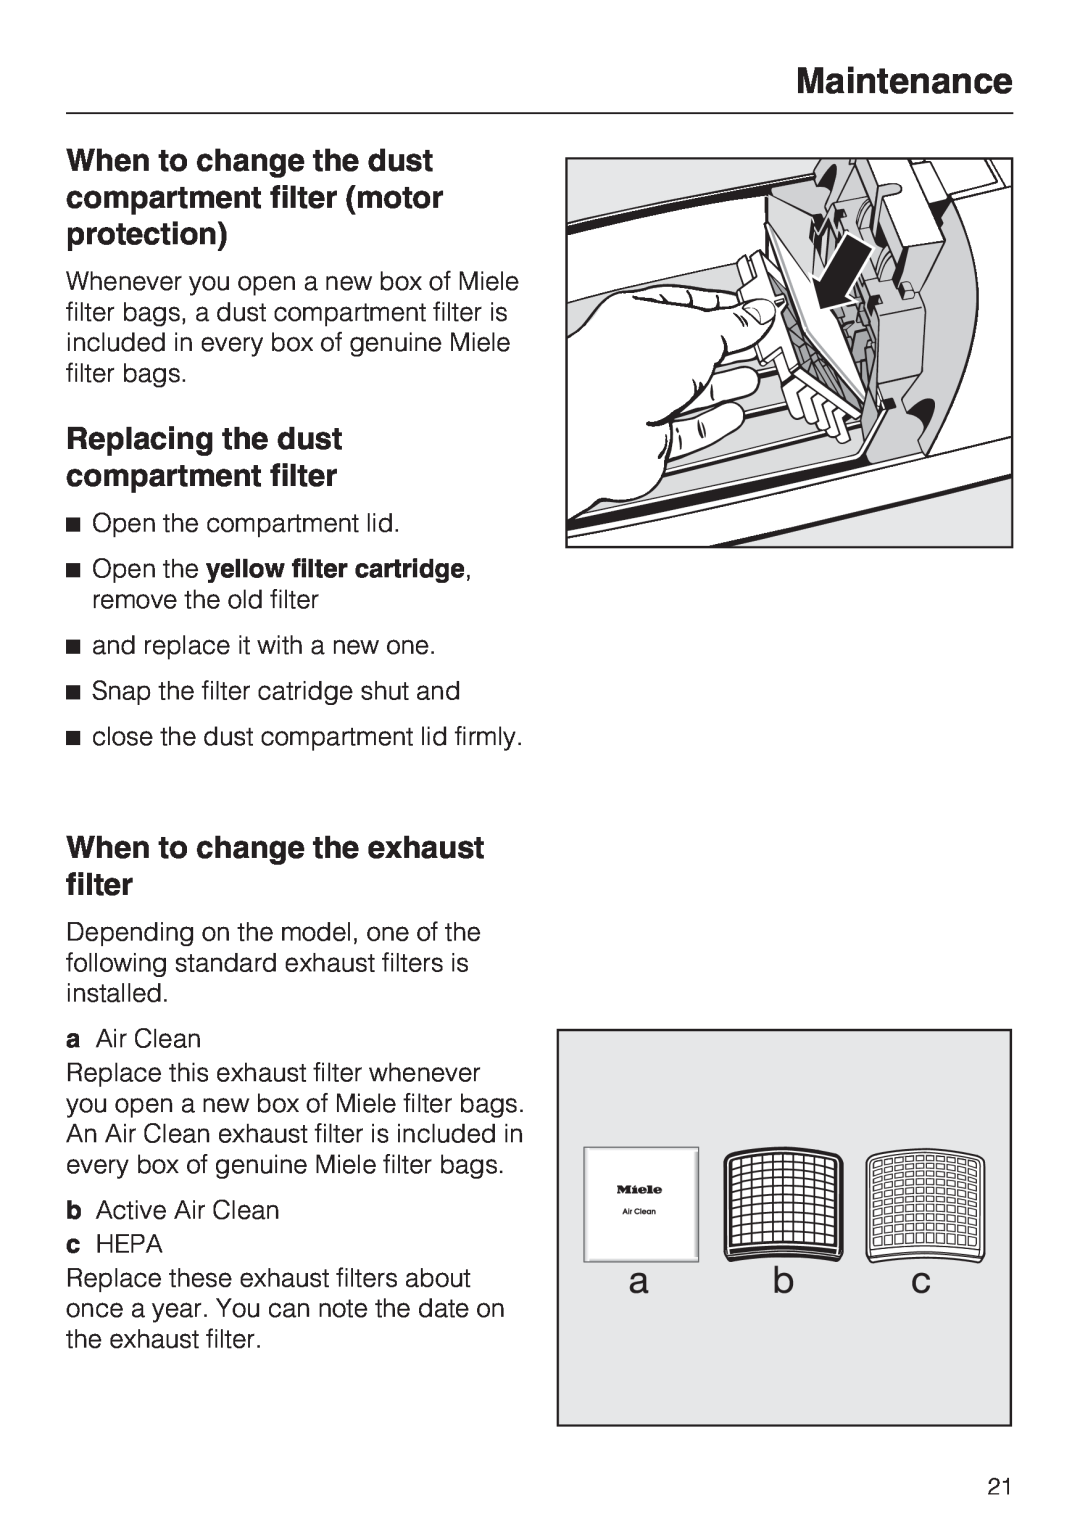 Miele S 190 manual Replacing the dust compartment filter, When to change the exhaust filter, Maintenance 